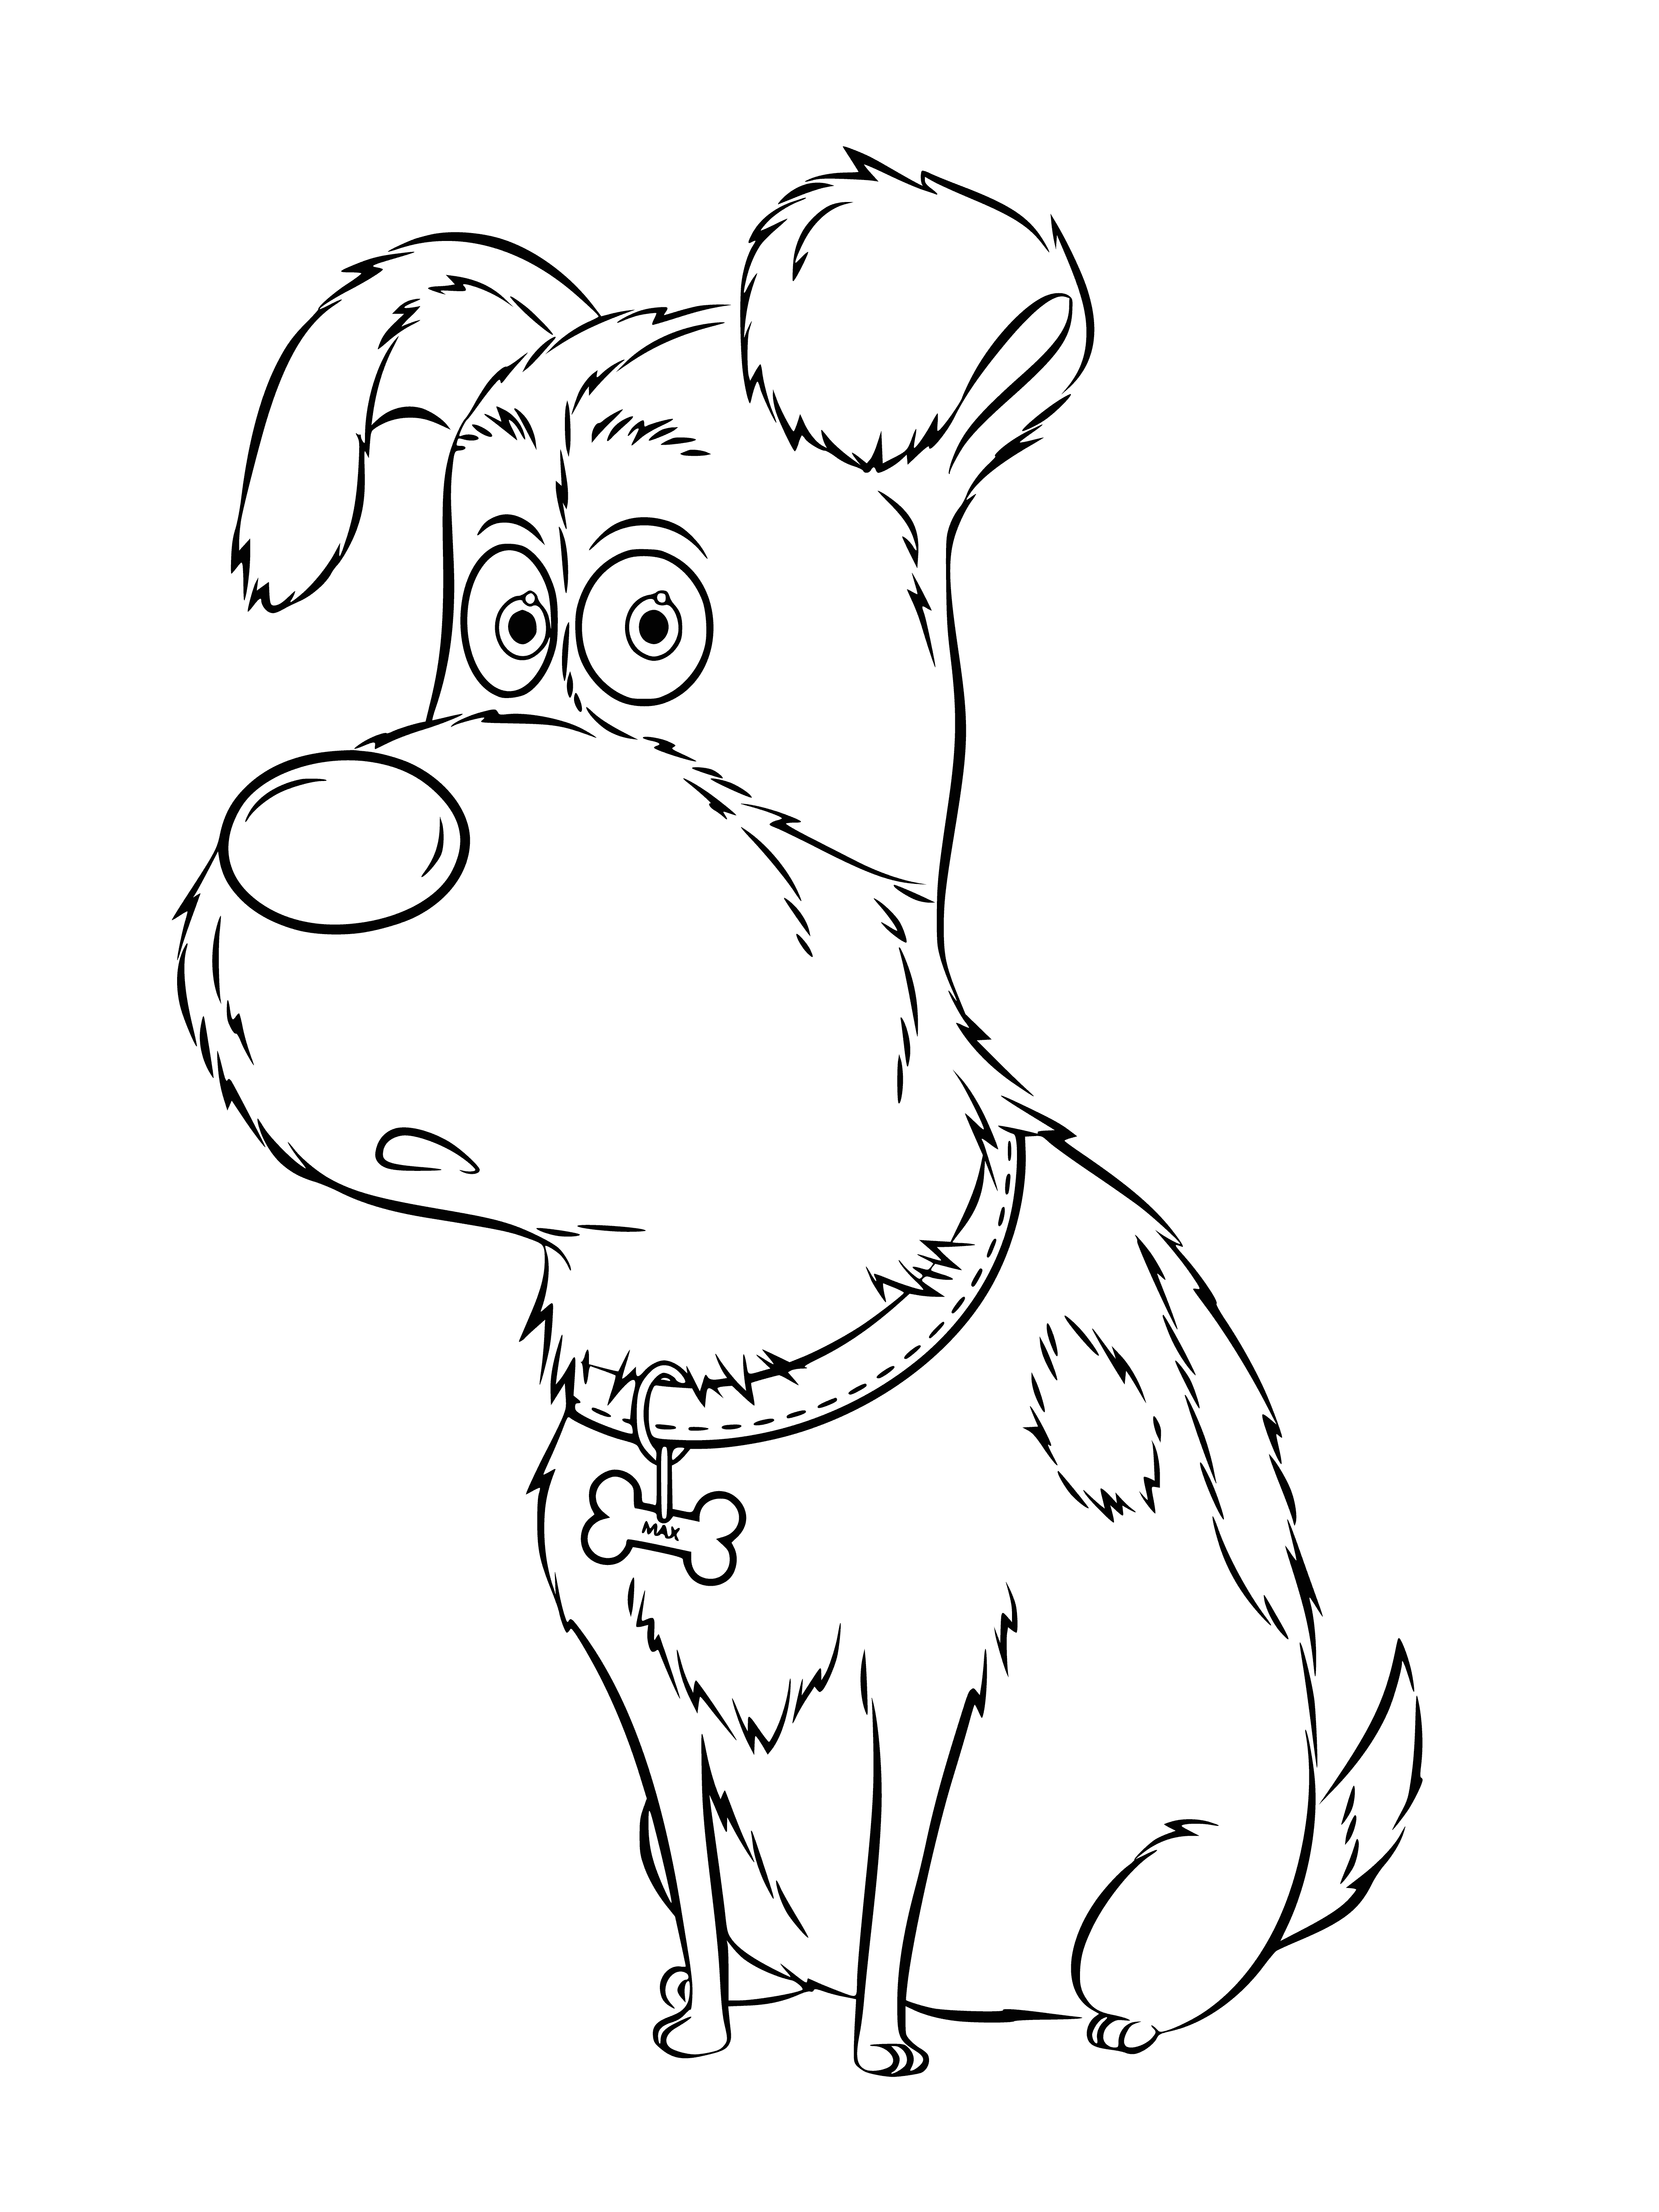 coloring page: Max, a brown & white terrier wearing a blue collar with a gold name tag, is enjoying a leisurely stroll down the sidewalk.